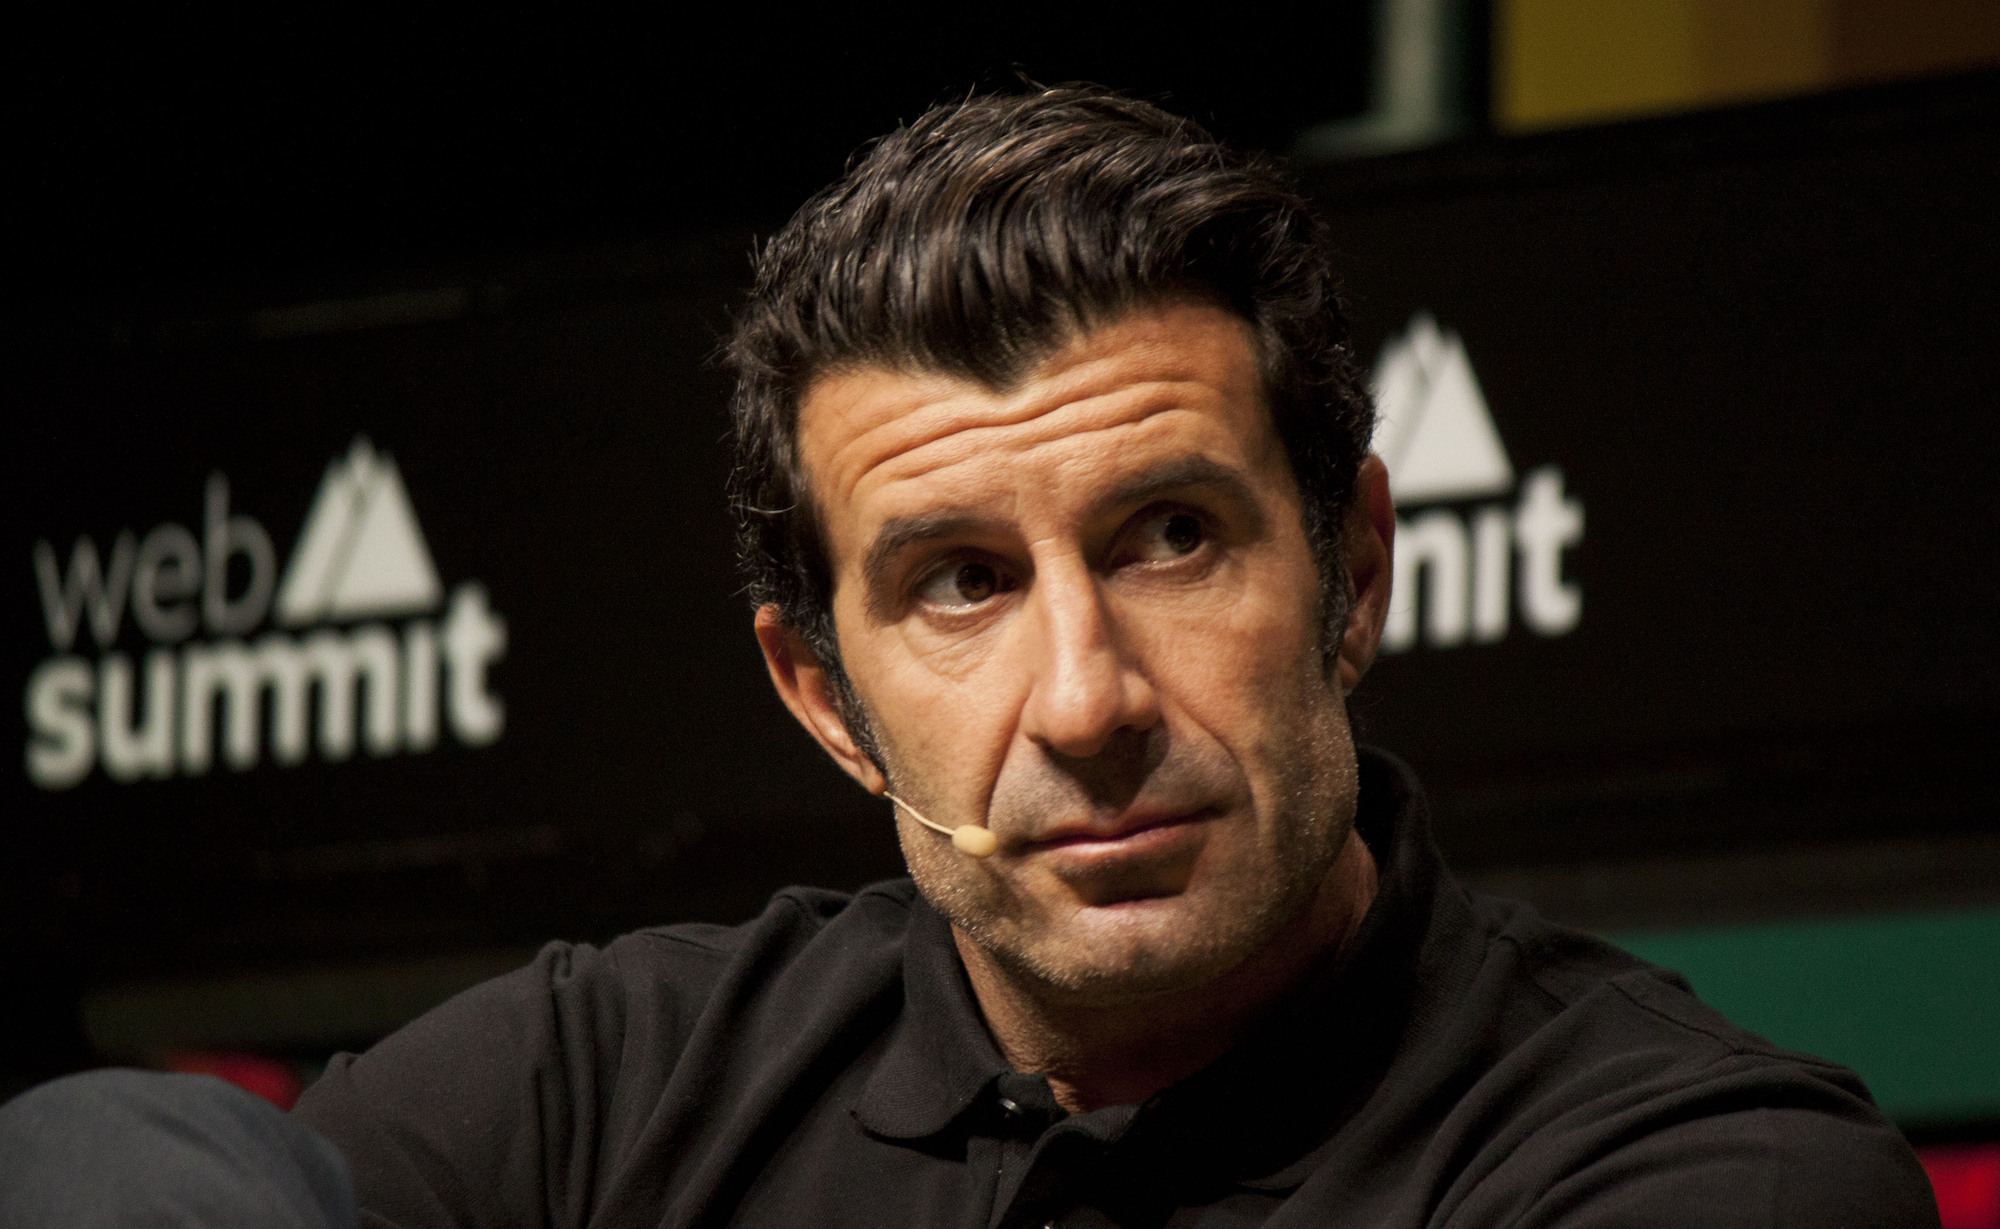 Soccer star Luís Figo will attend this weekend’s sports collectibles event